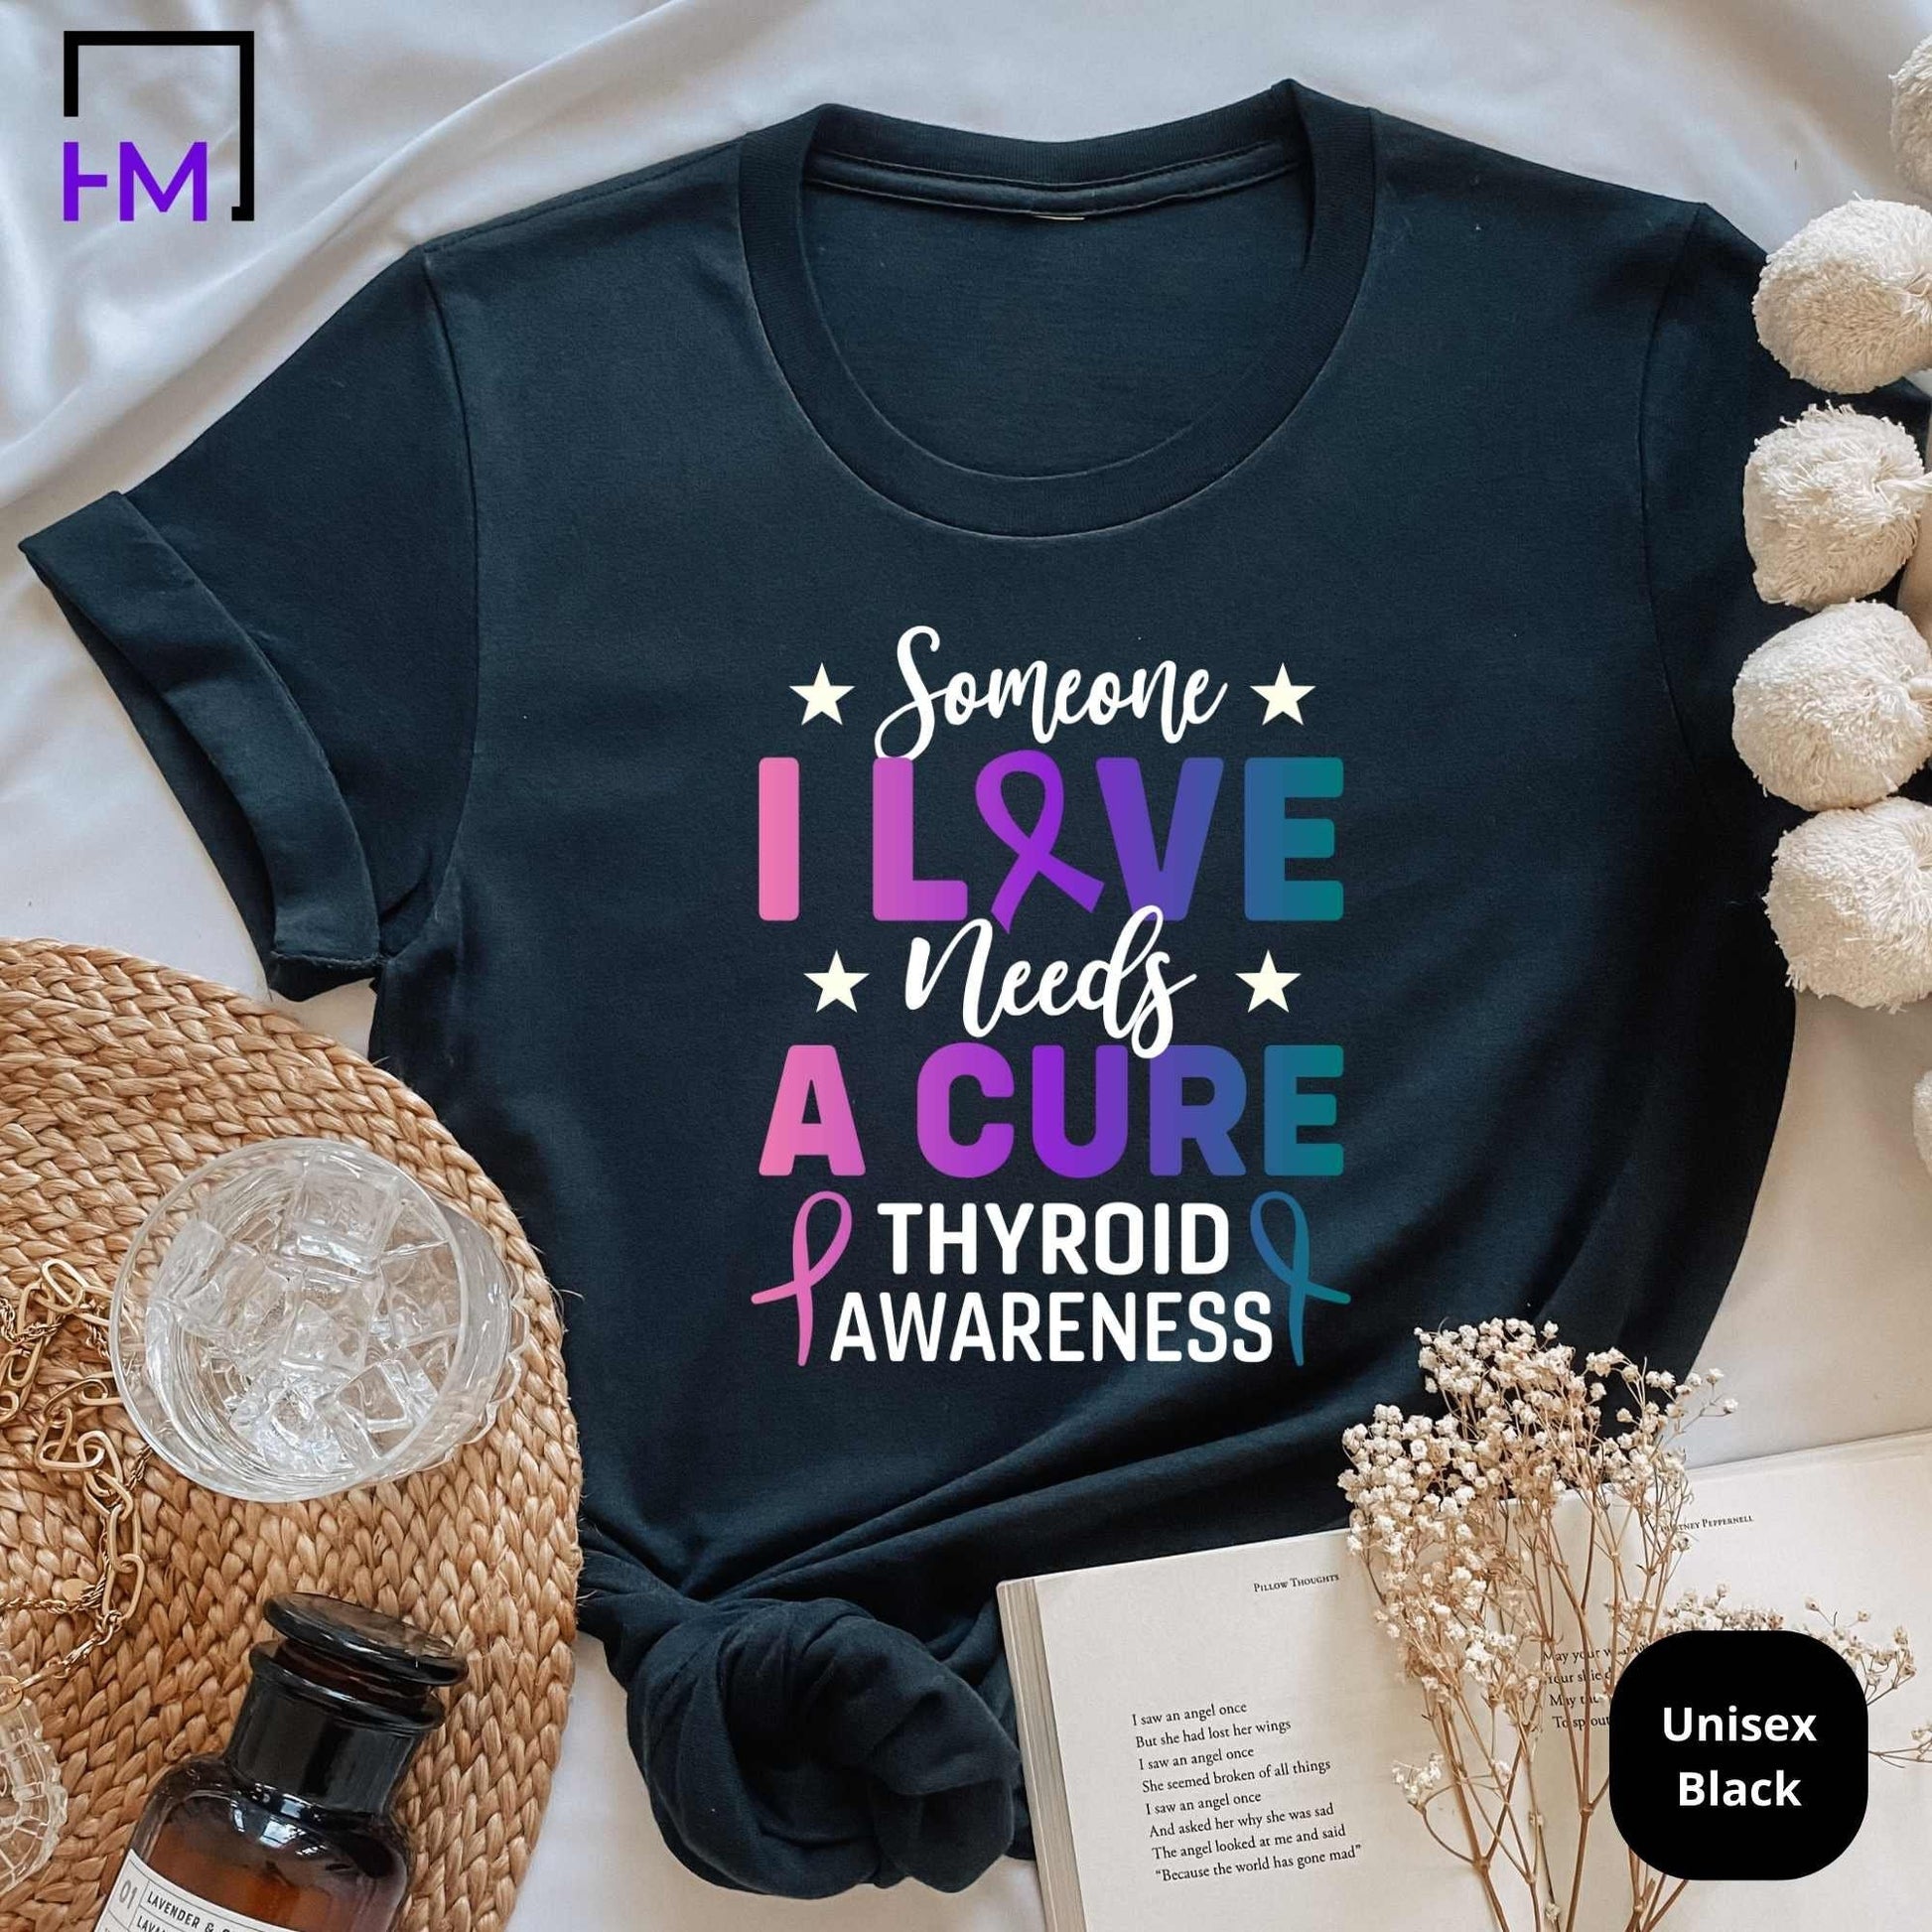 Thyroid Cancer Support Shirt, Womens Cancer Fighter Tops & Tees, Survivor Gift for Her, Purple Teal Pink Ribbon, Thyroid Cancer Awareness